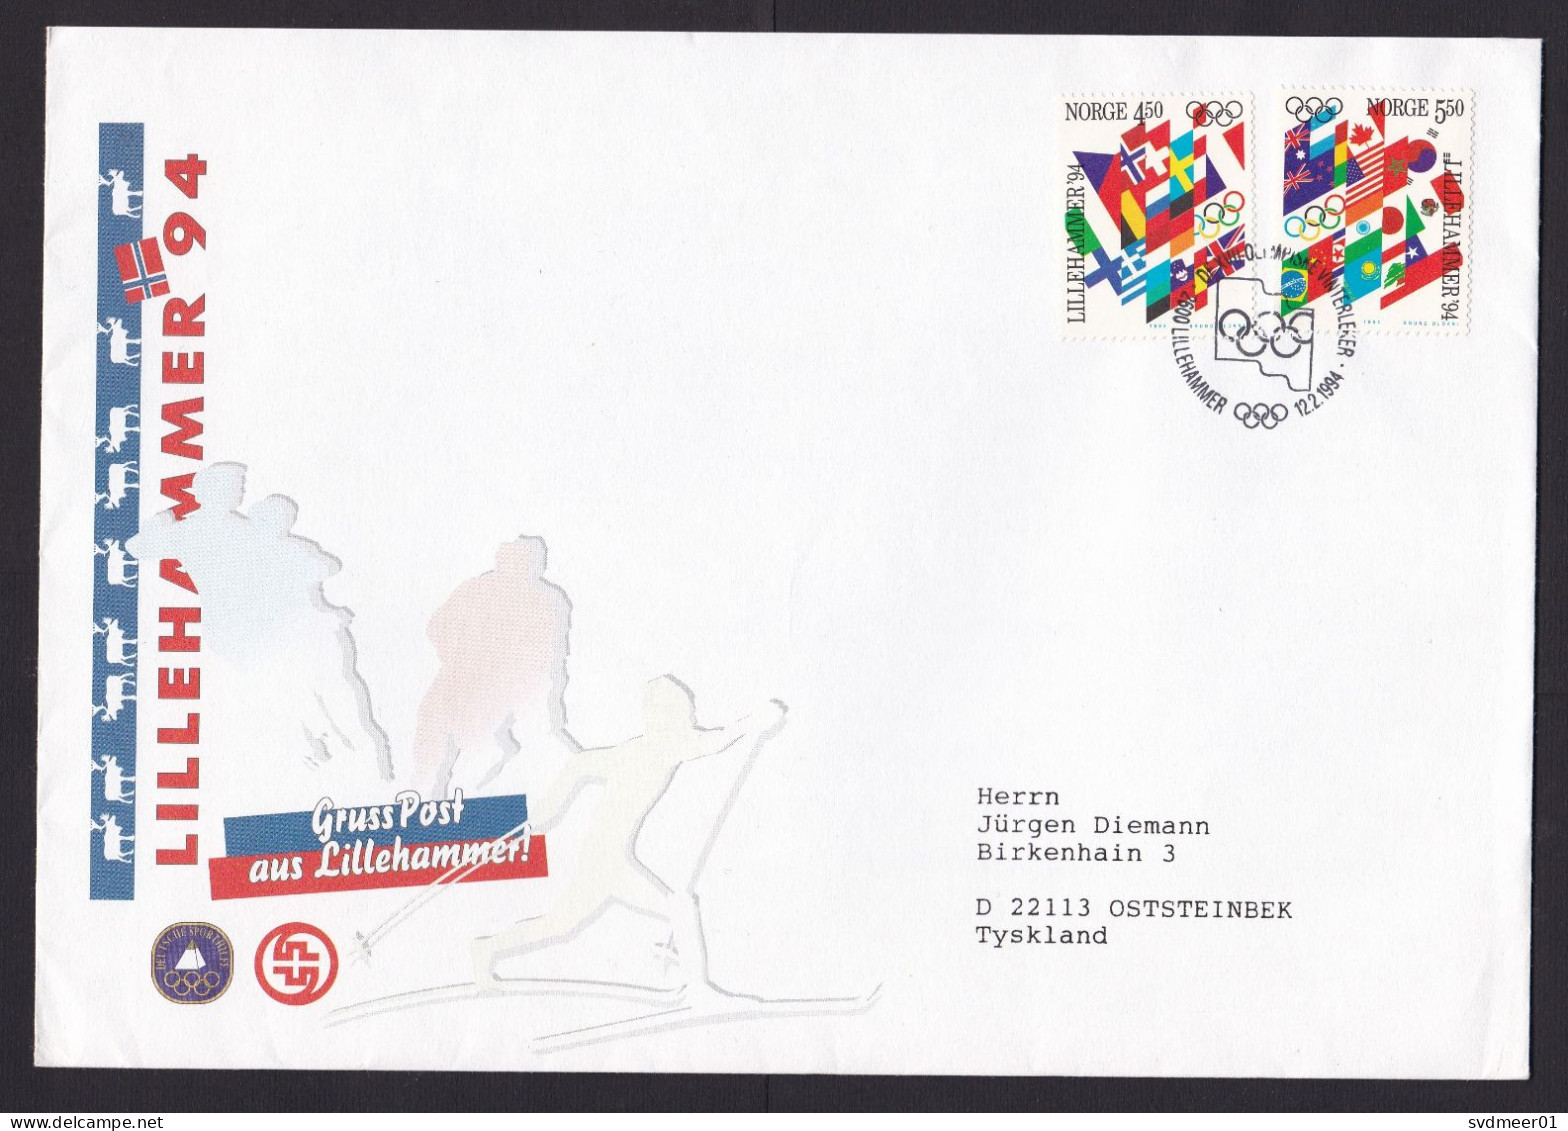 Norway: Cover To Gerrmany, 1994, 2 Stamps, Olympics Lillehammer, Picture Cards German Sporters Enclosed (traces Of Use) - Covers & Documents